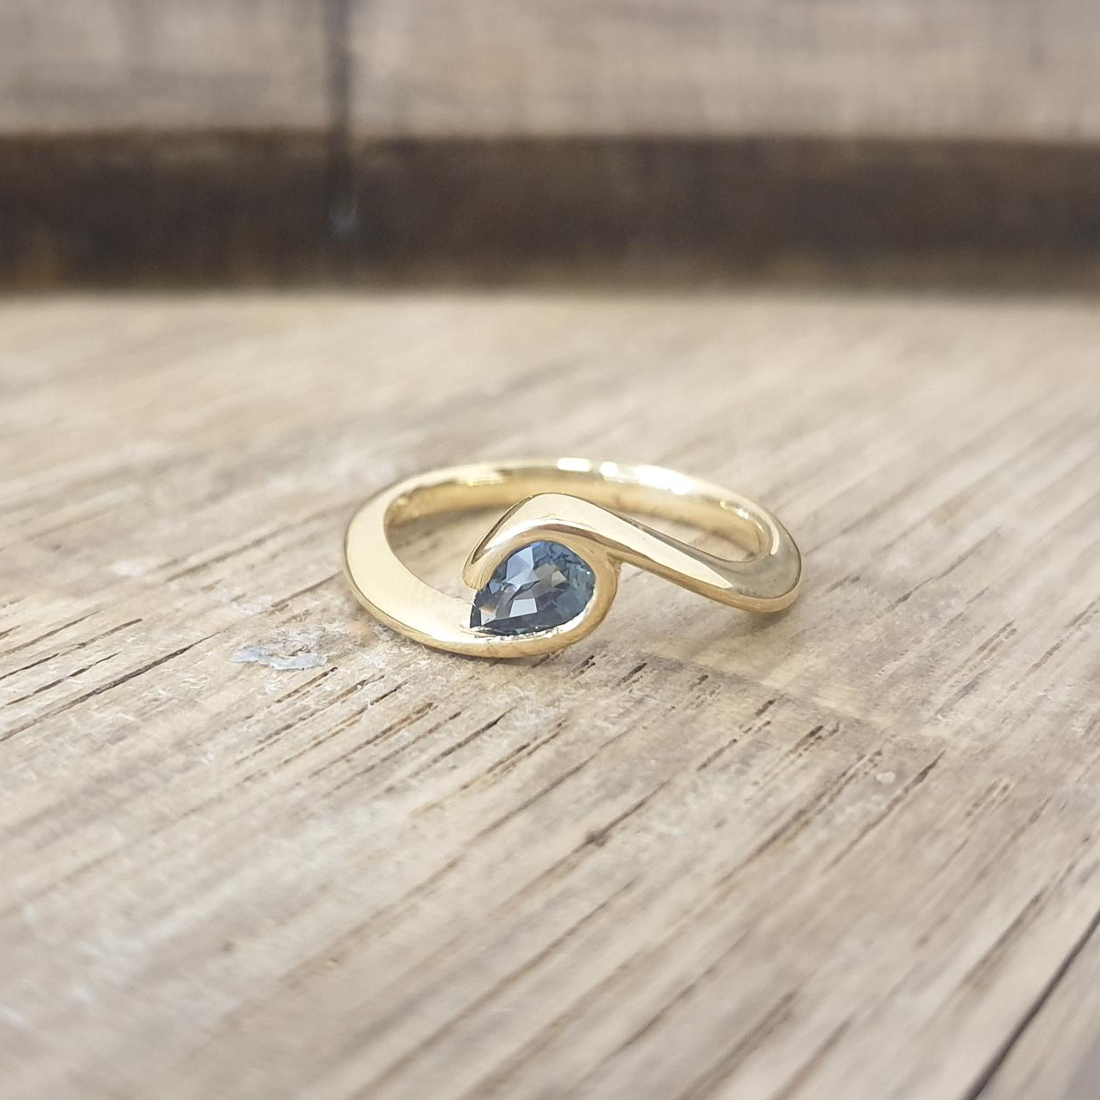 Teal sapphire wave ring